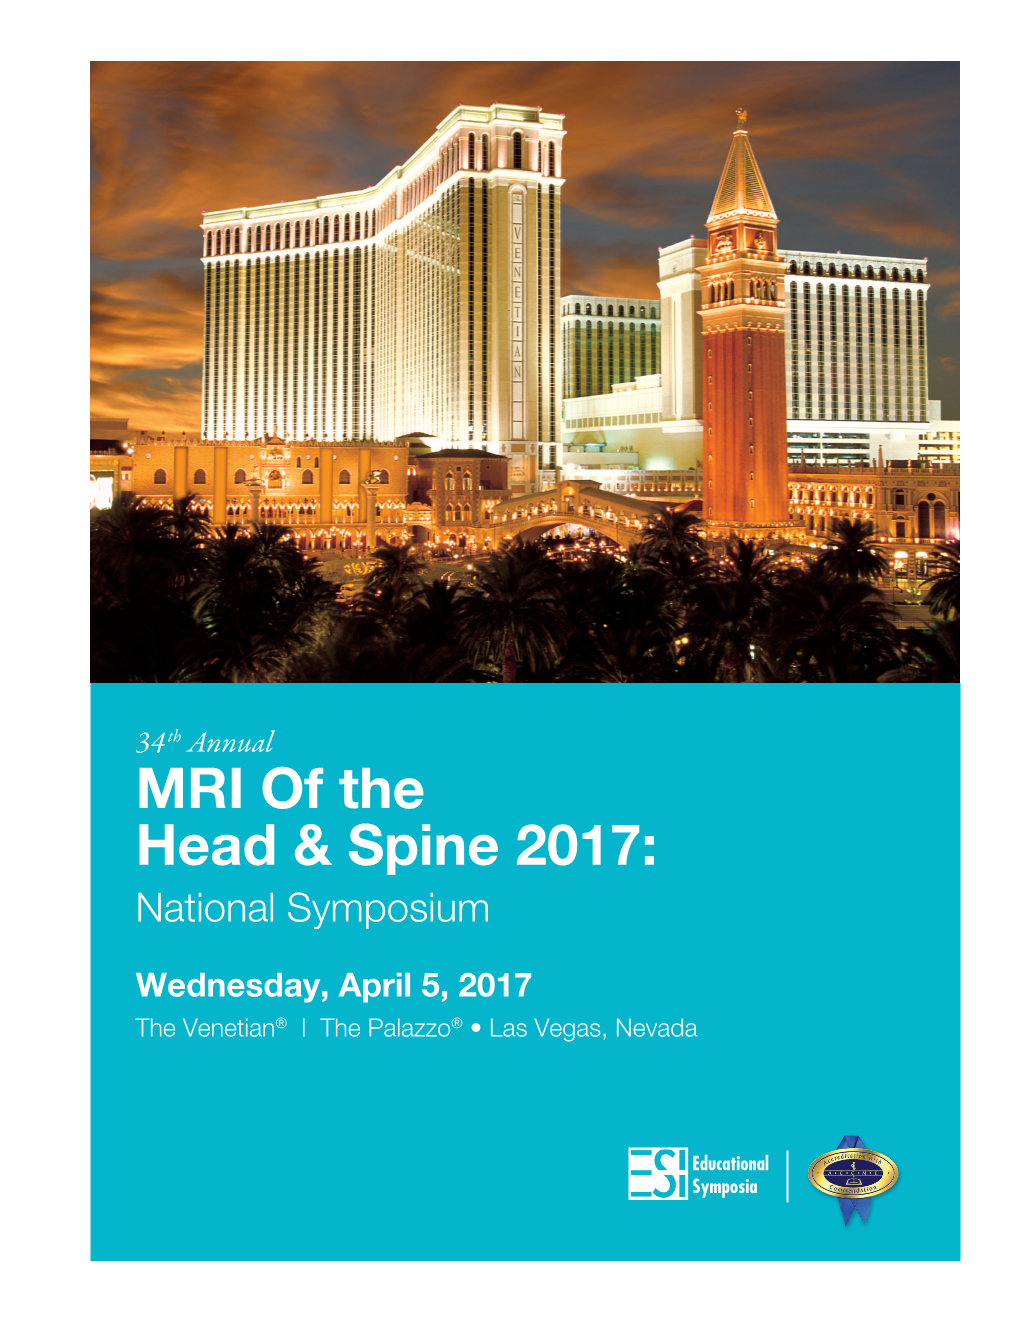 MRI of the Head & Spine 2017